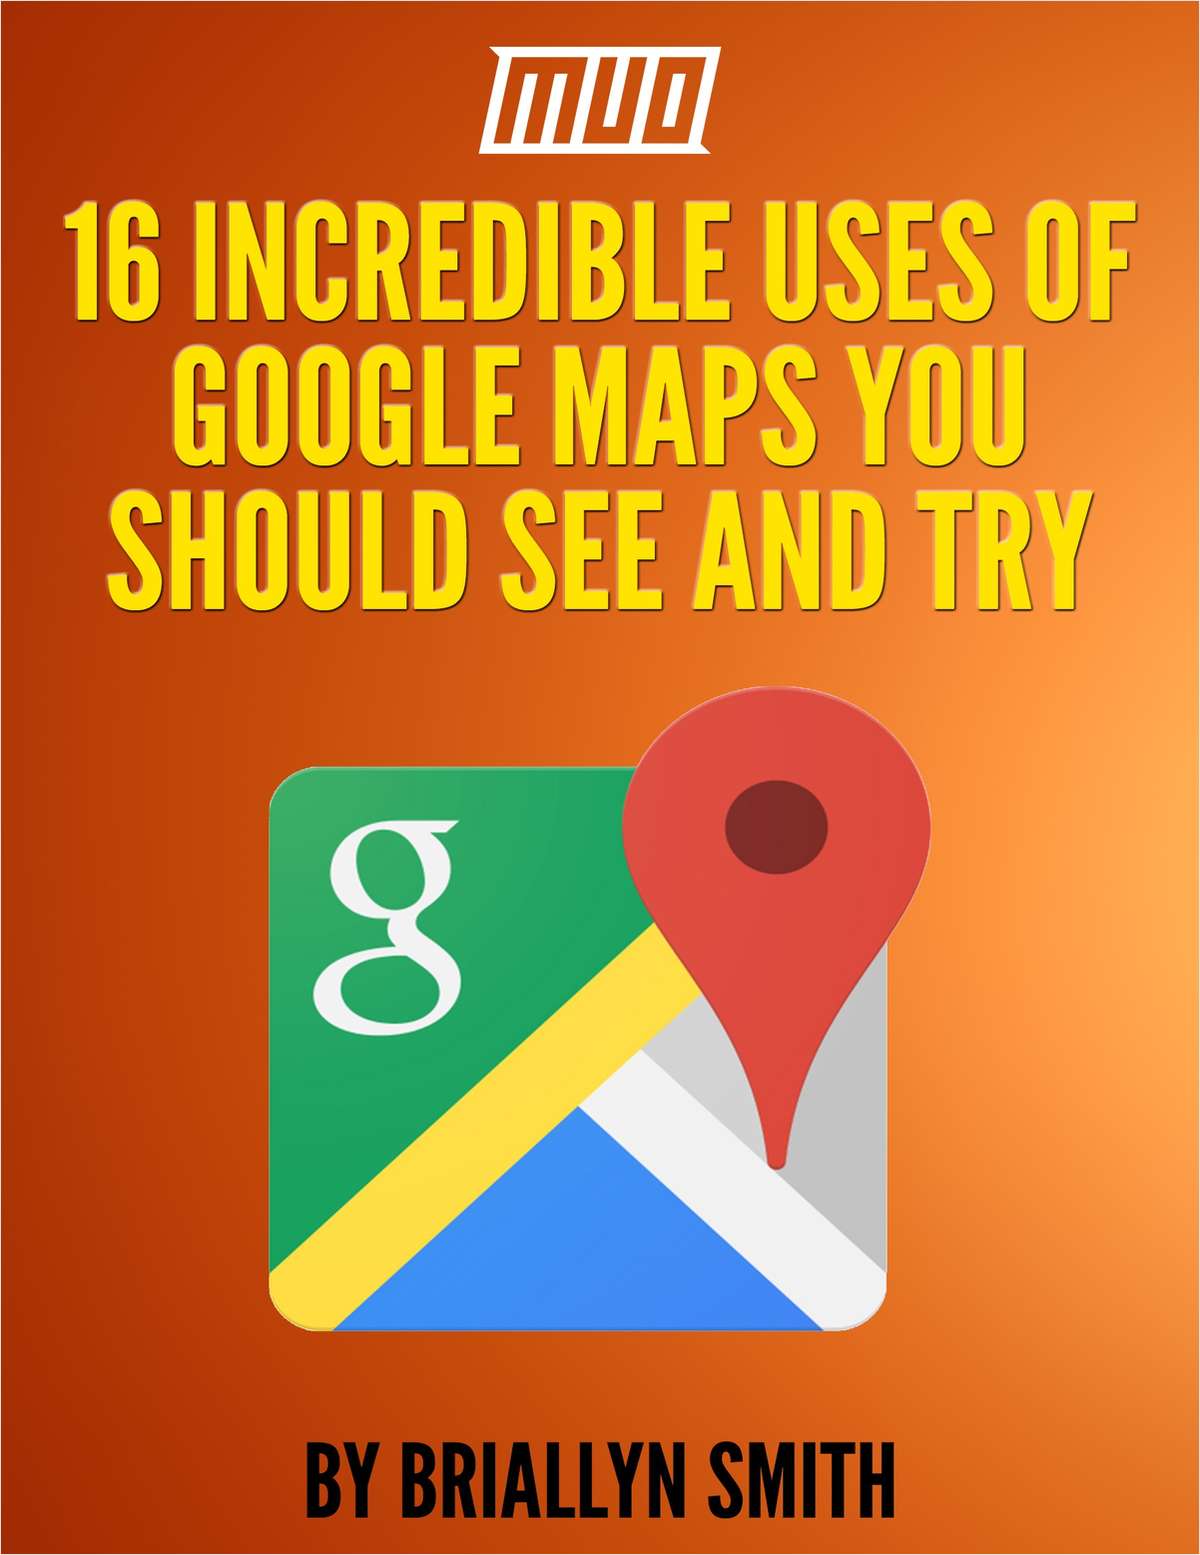 16 Incredible Uses of Google Maps You Should See and Try